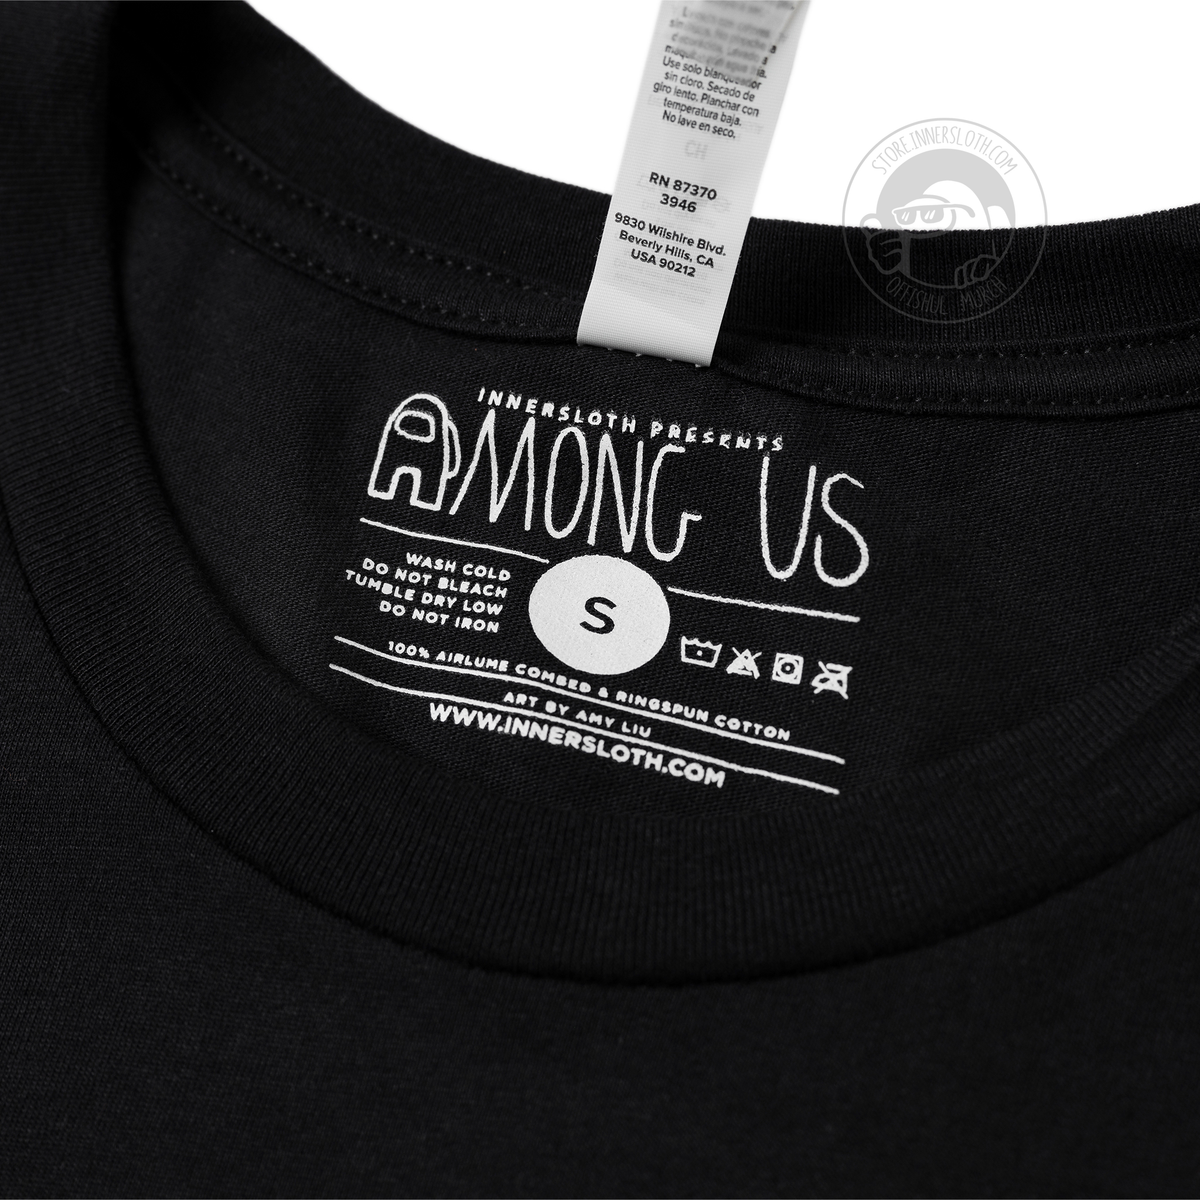 A close up photograph of the tag and printed information on the inside of the shirt. The text reads “Innersloth presents Among Us.” There are several symbols that show the following care instructions wash cold, do not bleach, tumble dry low, do not iron. The size of the shirt is Small. Additional text reads “ 100% airlume combed &amp; ringpun cotton. Art by Amy Liu. www.Innersloth.com” 